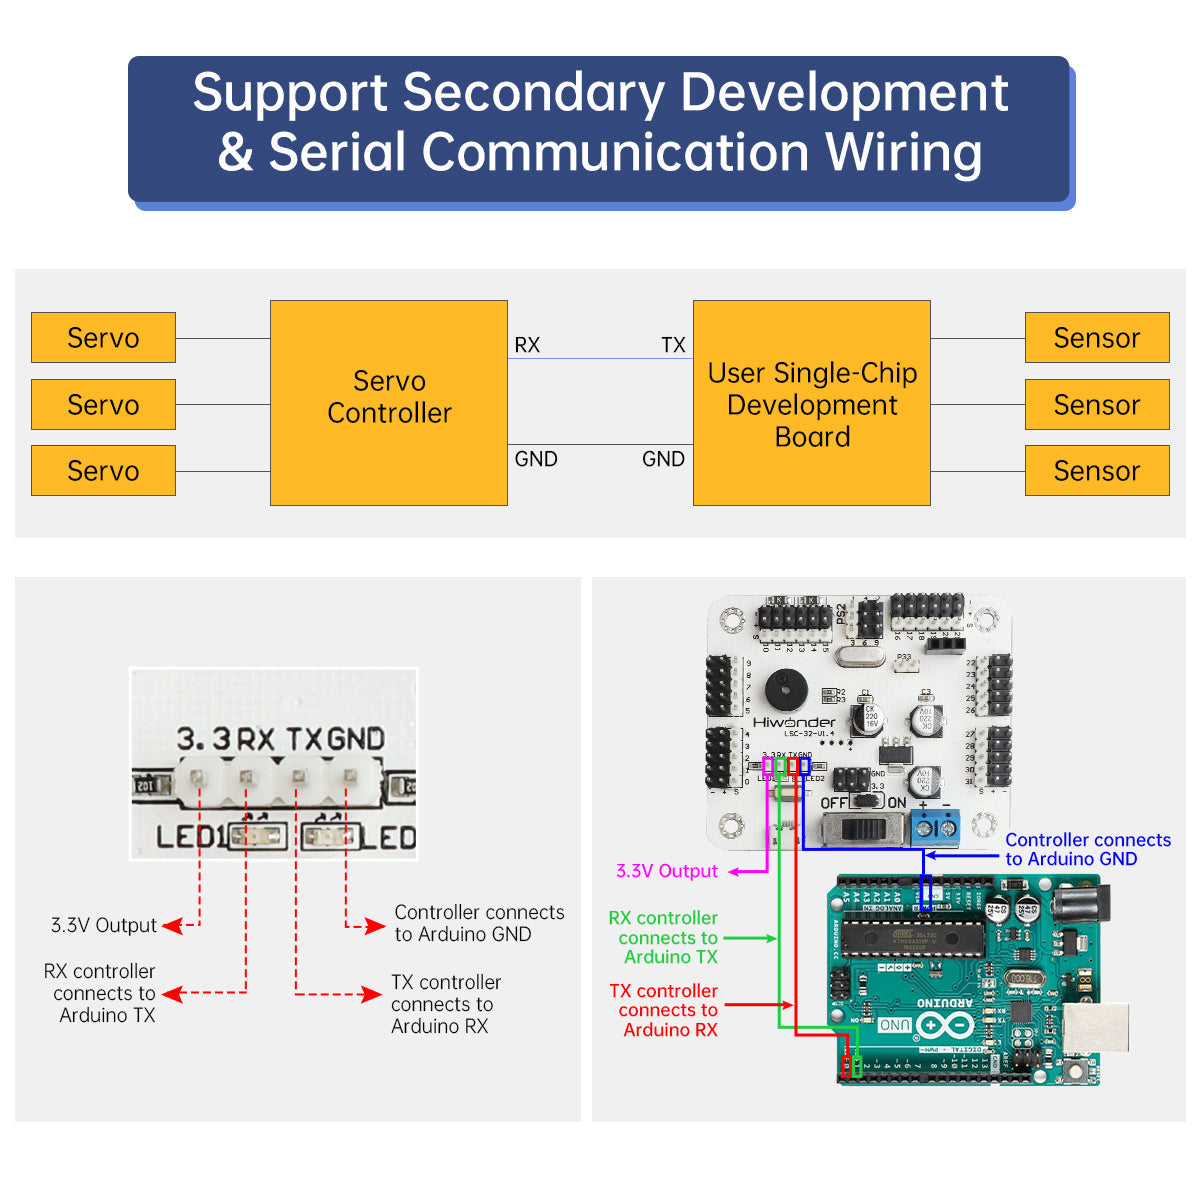 LSC-32: Hiwonder 32 Channel Digital Servo Controller with 16M Memory/ Arduino Compatible